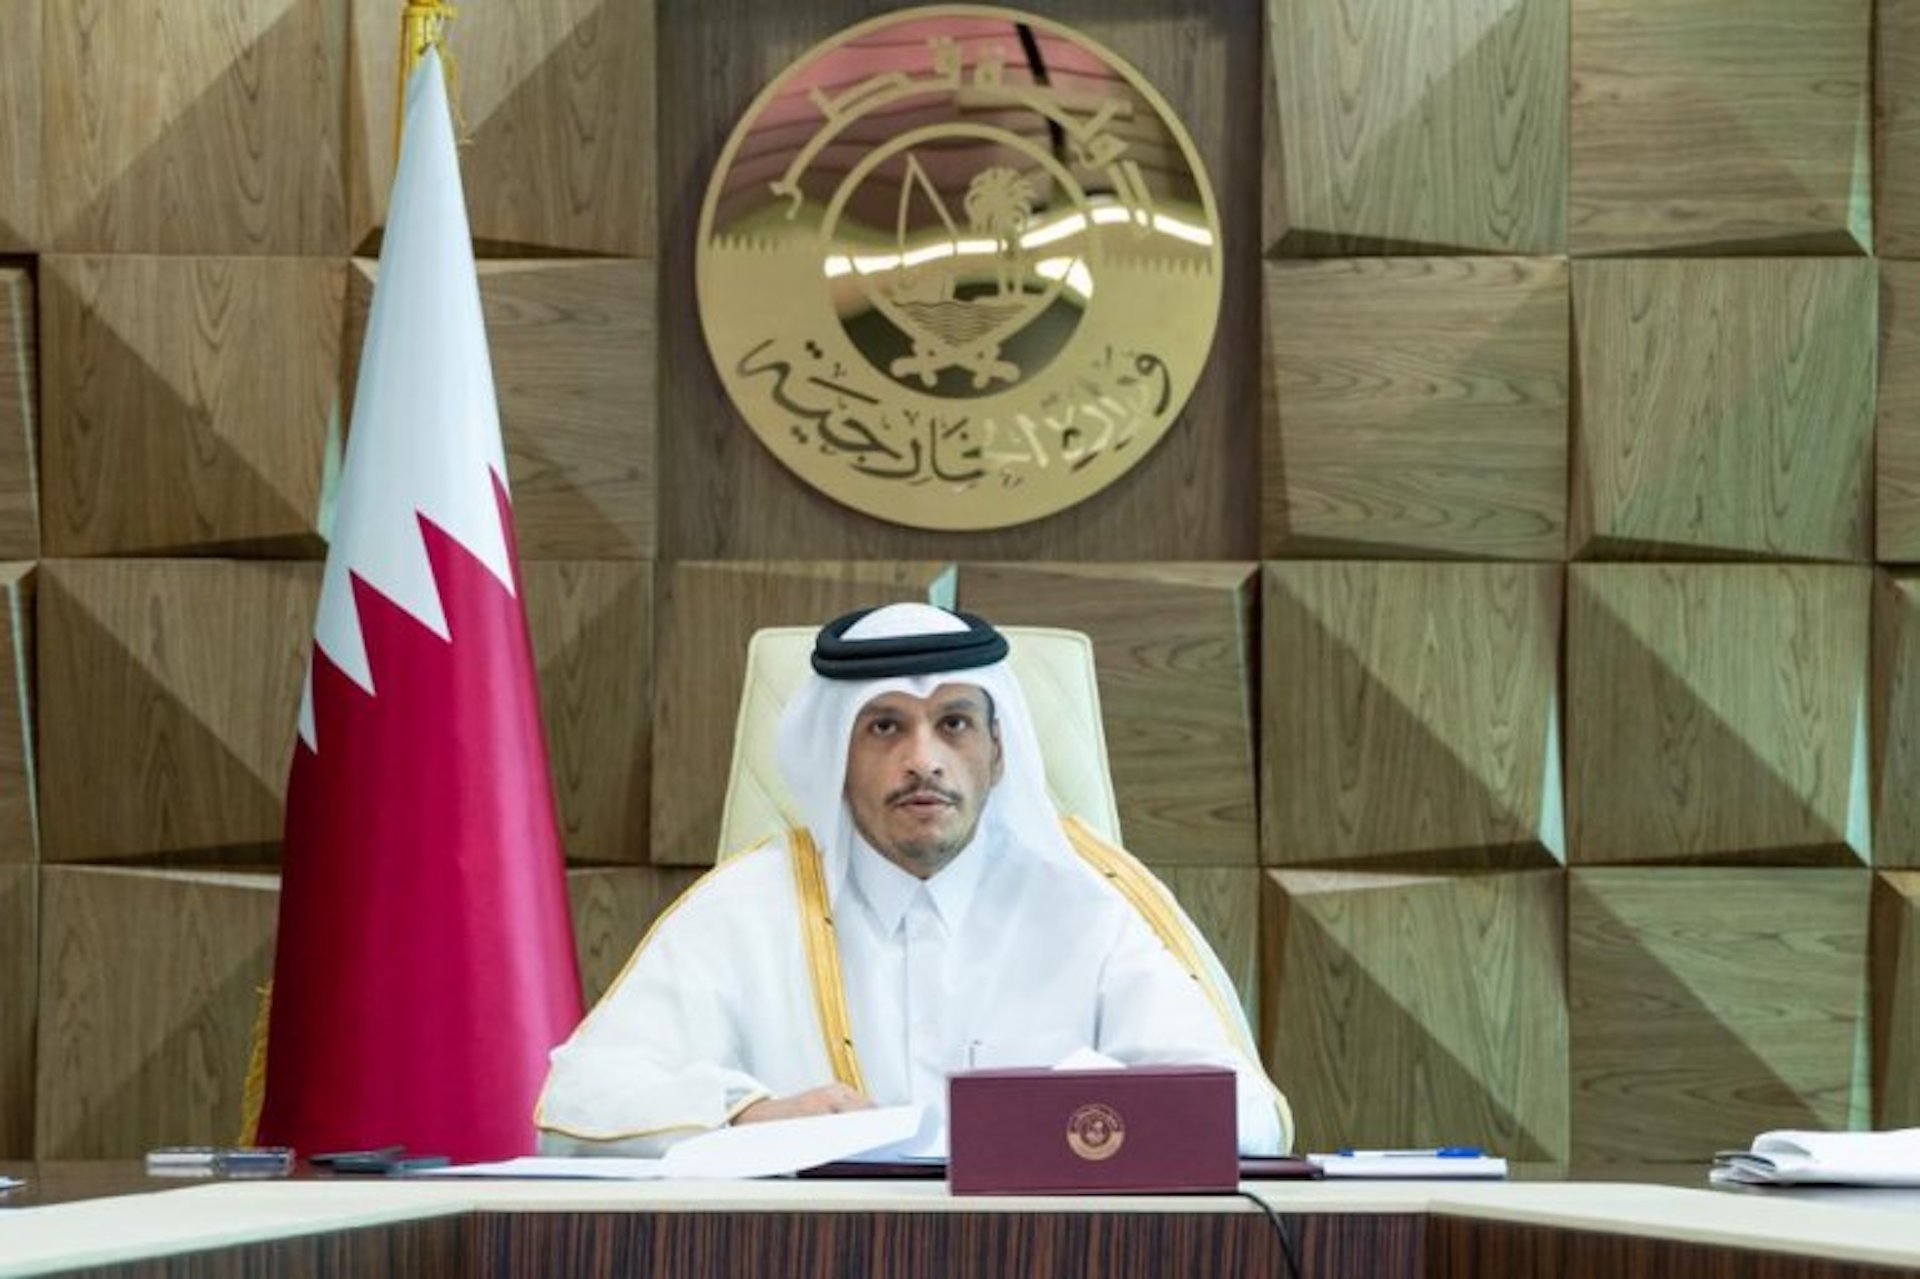 Diplomacy and dialogue are at the heart of the Doha Forum - FM